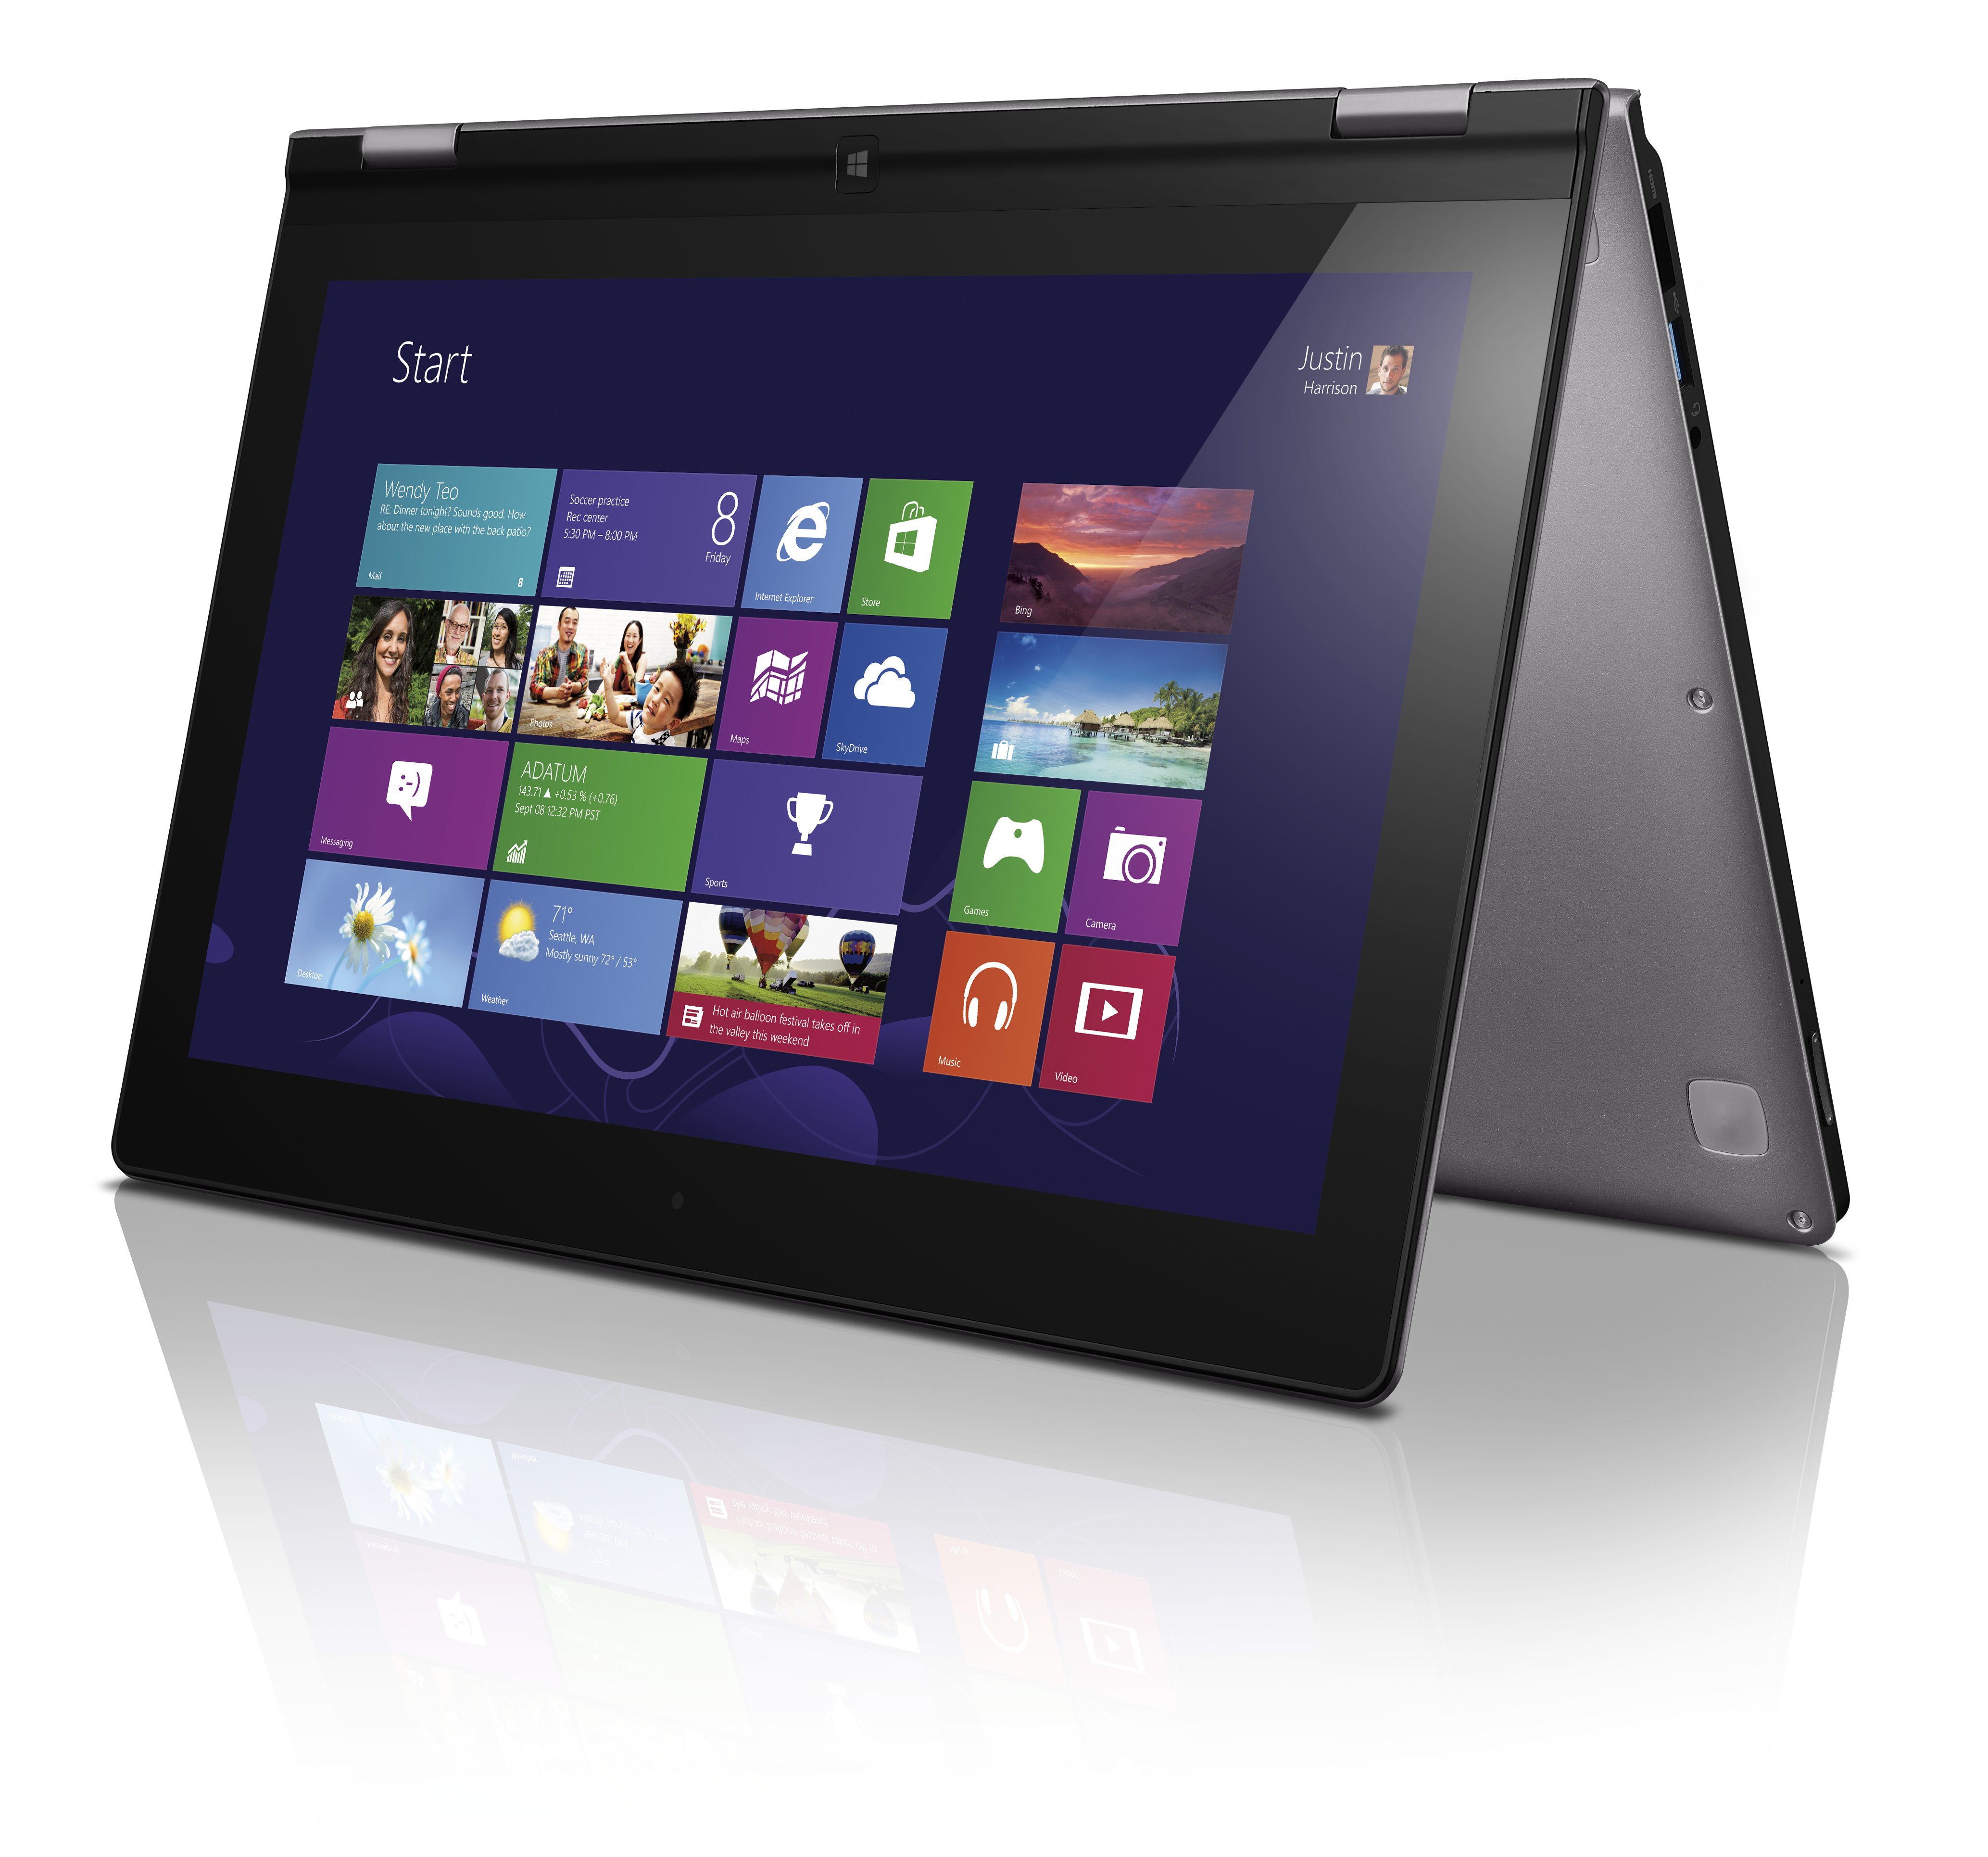 Windows 8 Tablets More Popular than iPads Among Workers